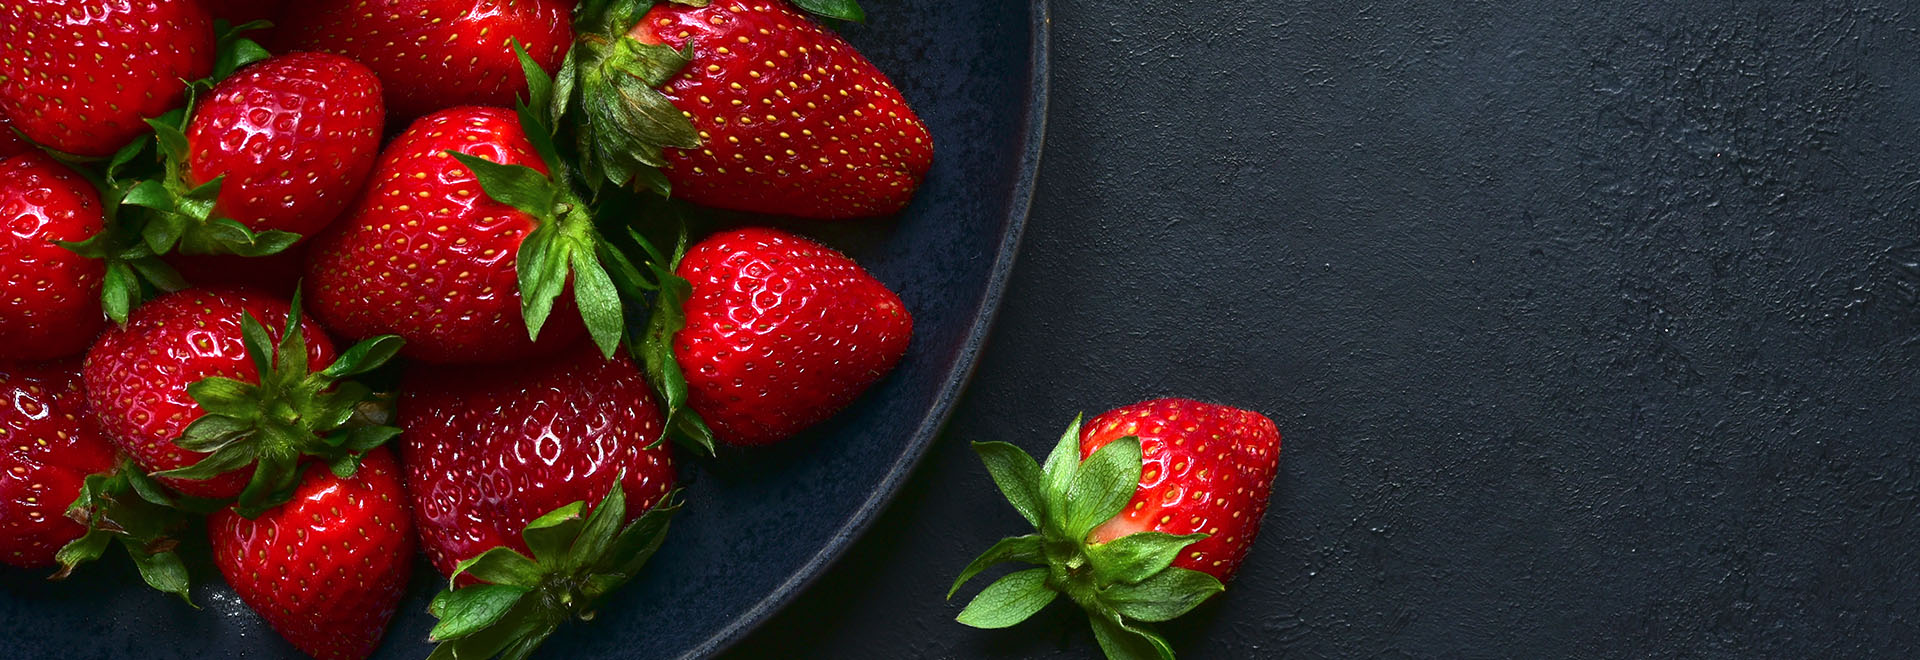 healthy-benefits-of-strawberry-for-immunity-and-beauty